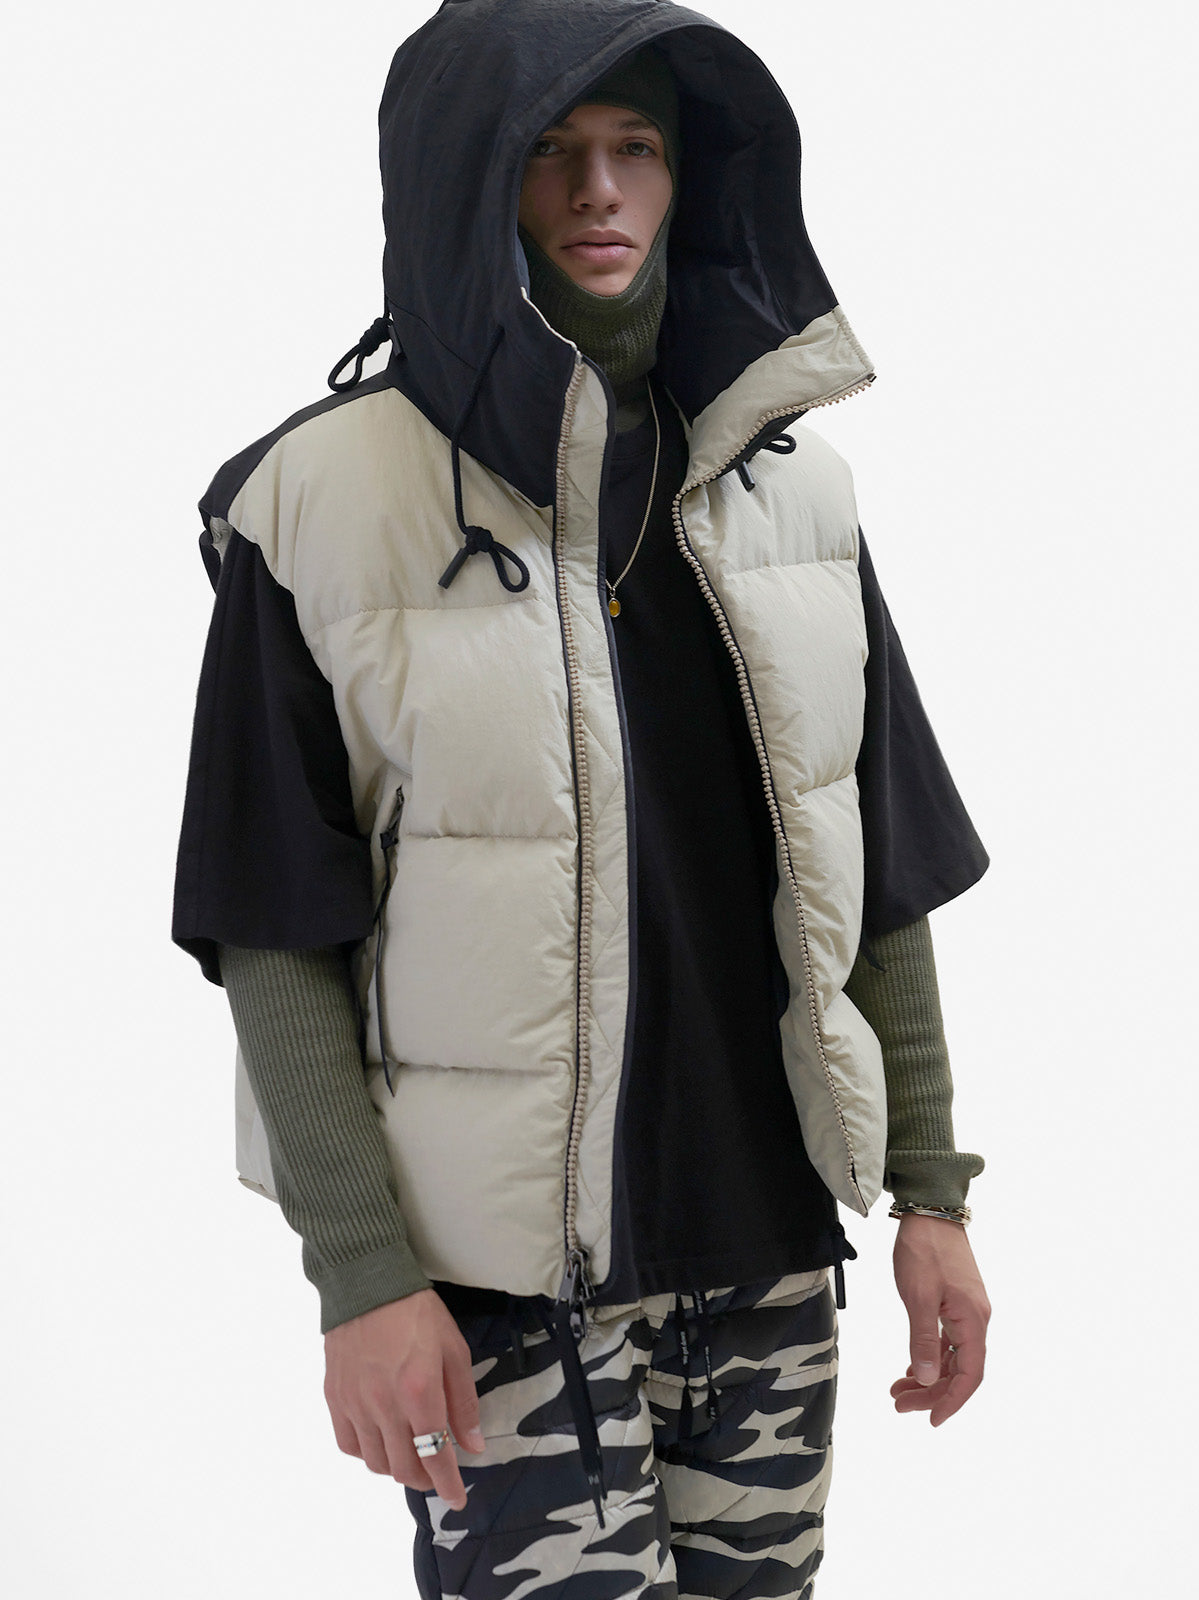 Man HOODED DOWN VEST - Canvas - hood up